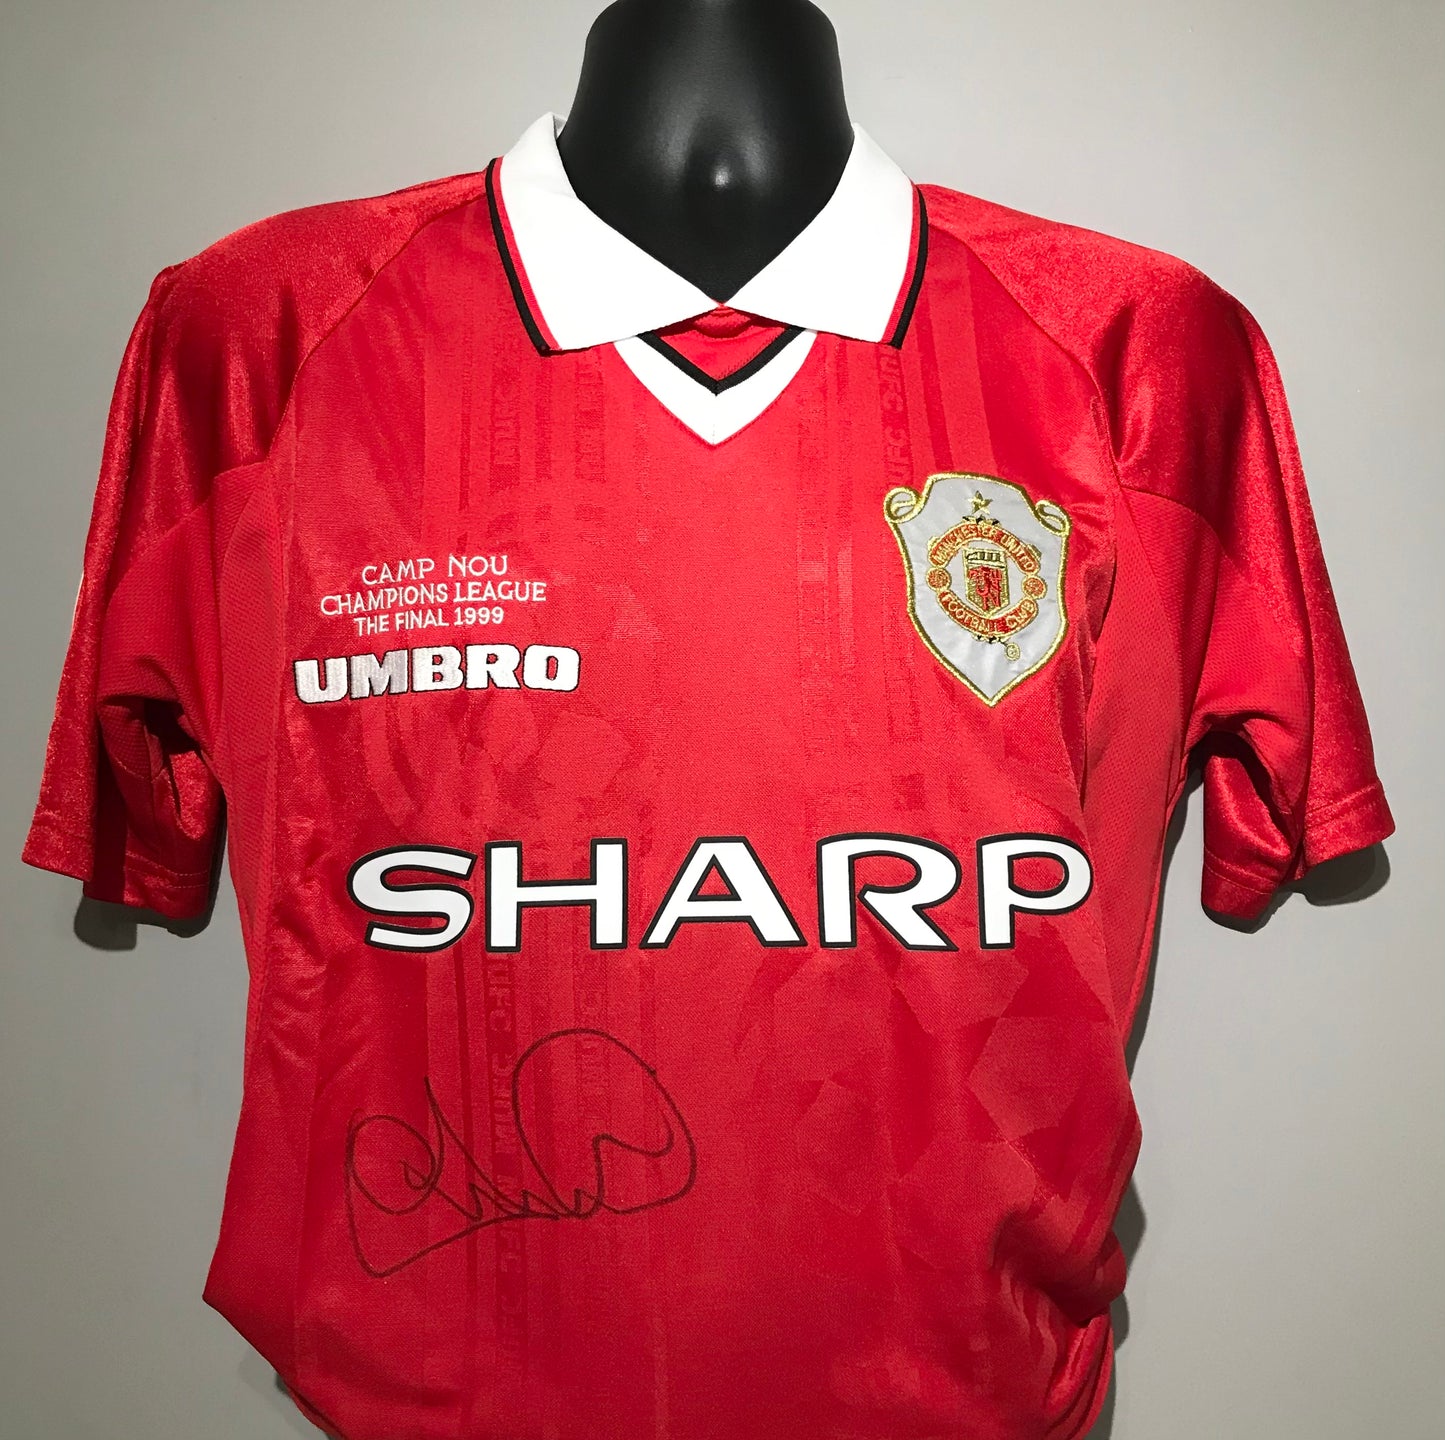 Andy Cole - Manchester United FC - "1999 CHAMPIONS LEAGUE FINAL" hand-signed replica shirt - MUFC memorabilia, football shirt (UNFRAMED)